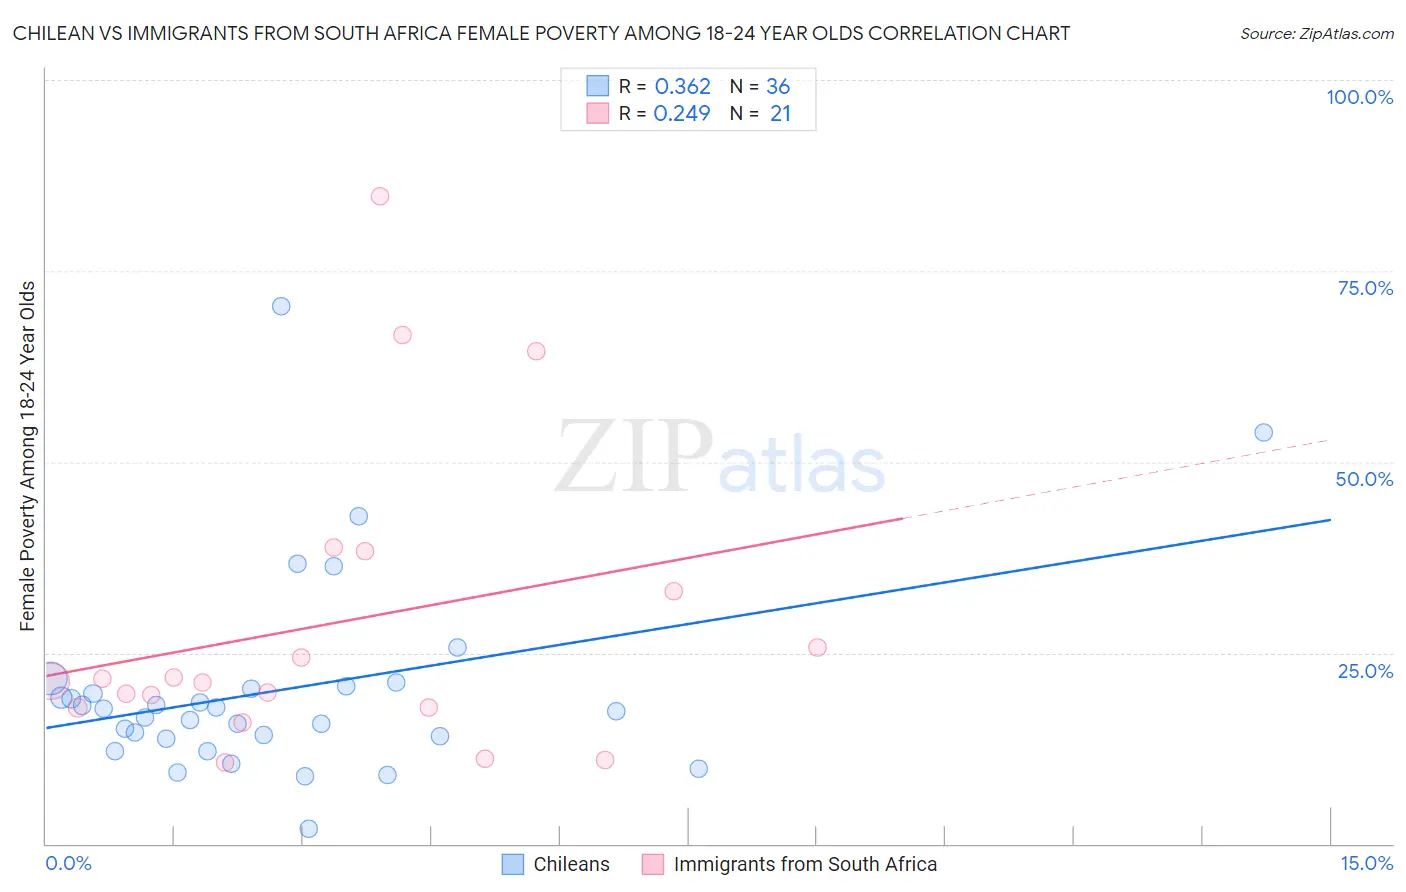 Chilean vs Immigrants from South Africa Female Poverty Among 18-24 Year Olds